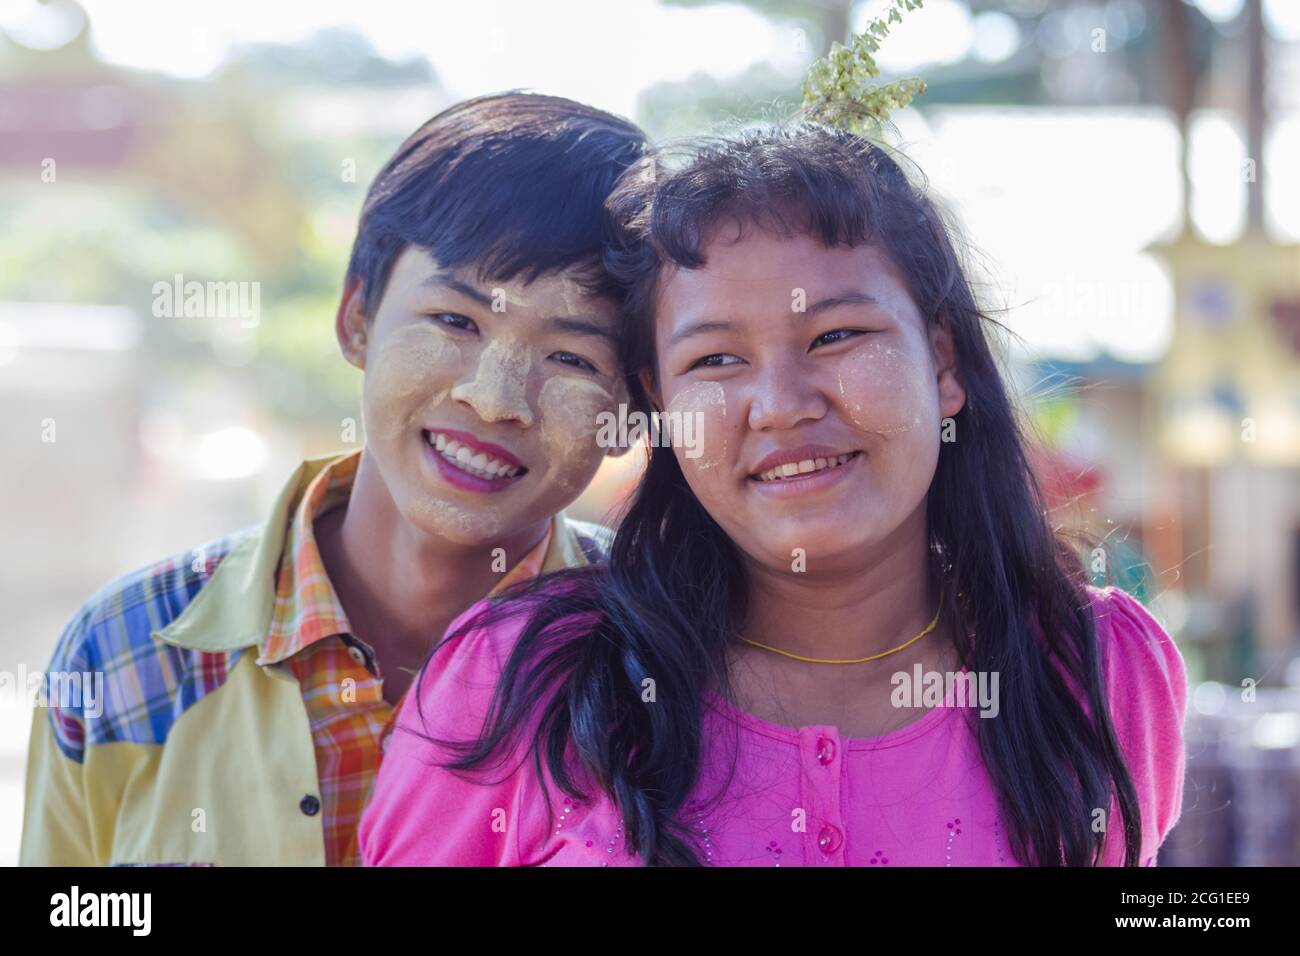 Mawlamyine, Myanmar. November 30, 2016 : A portrait of unidentified young Burmese boy, covered with thanaka paste. High quality photo Stock Photo